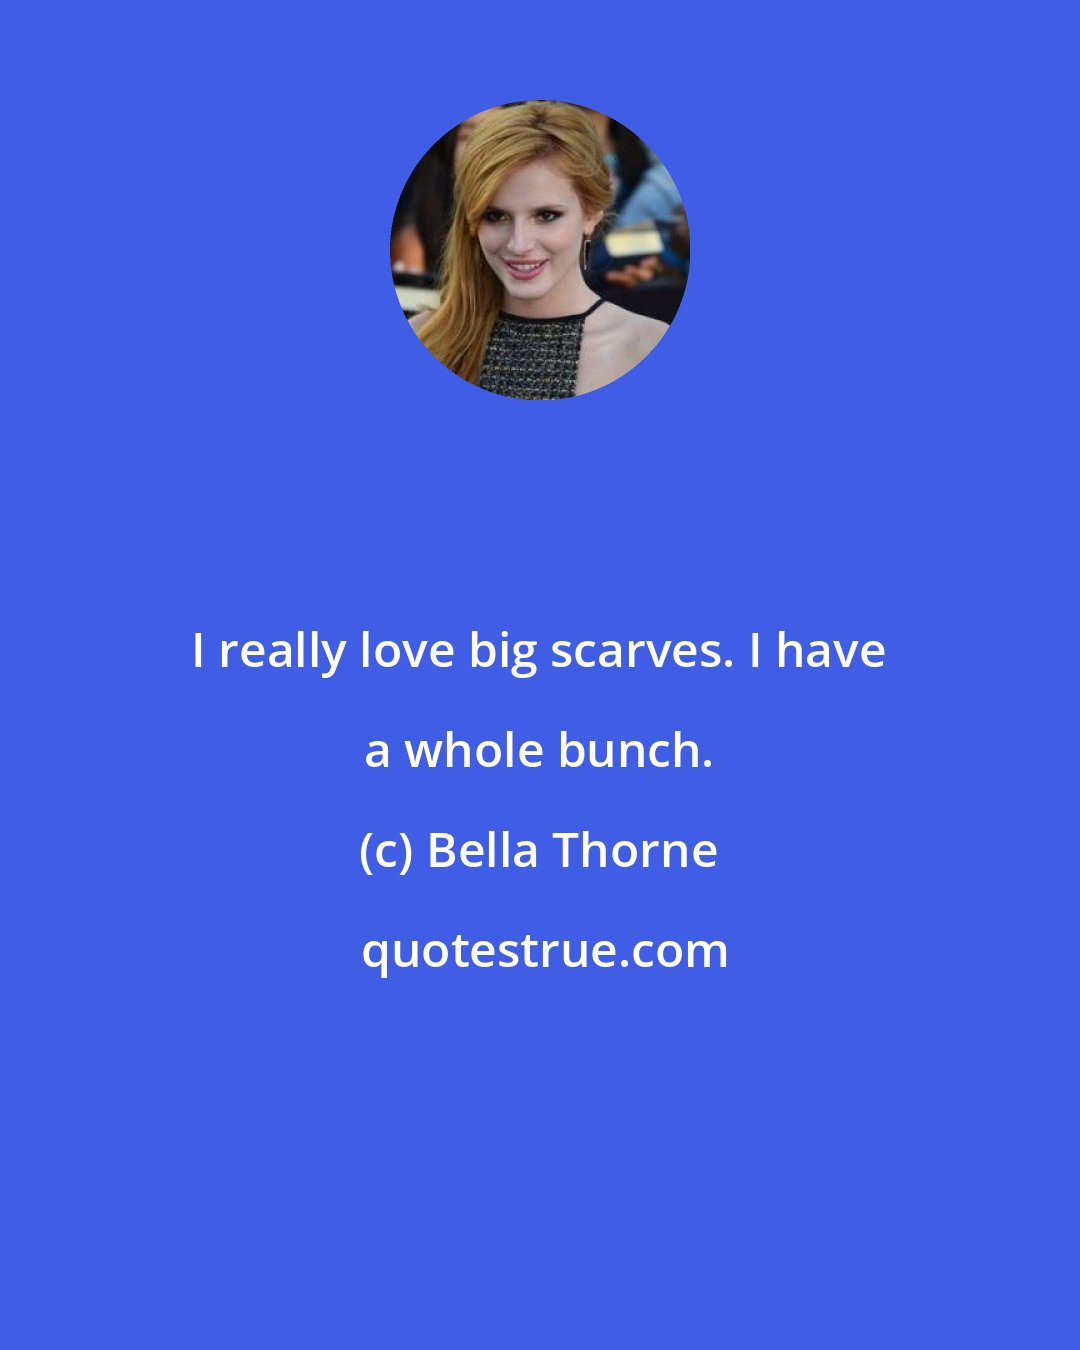 Bella Thorne: I really love big scarves. I have a whole bunch.